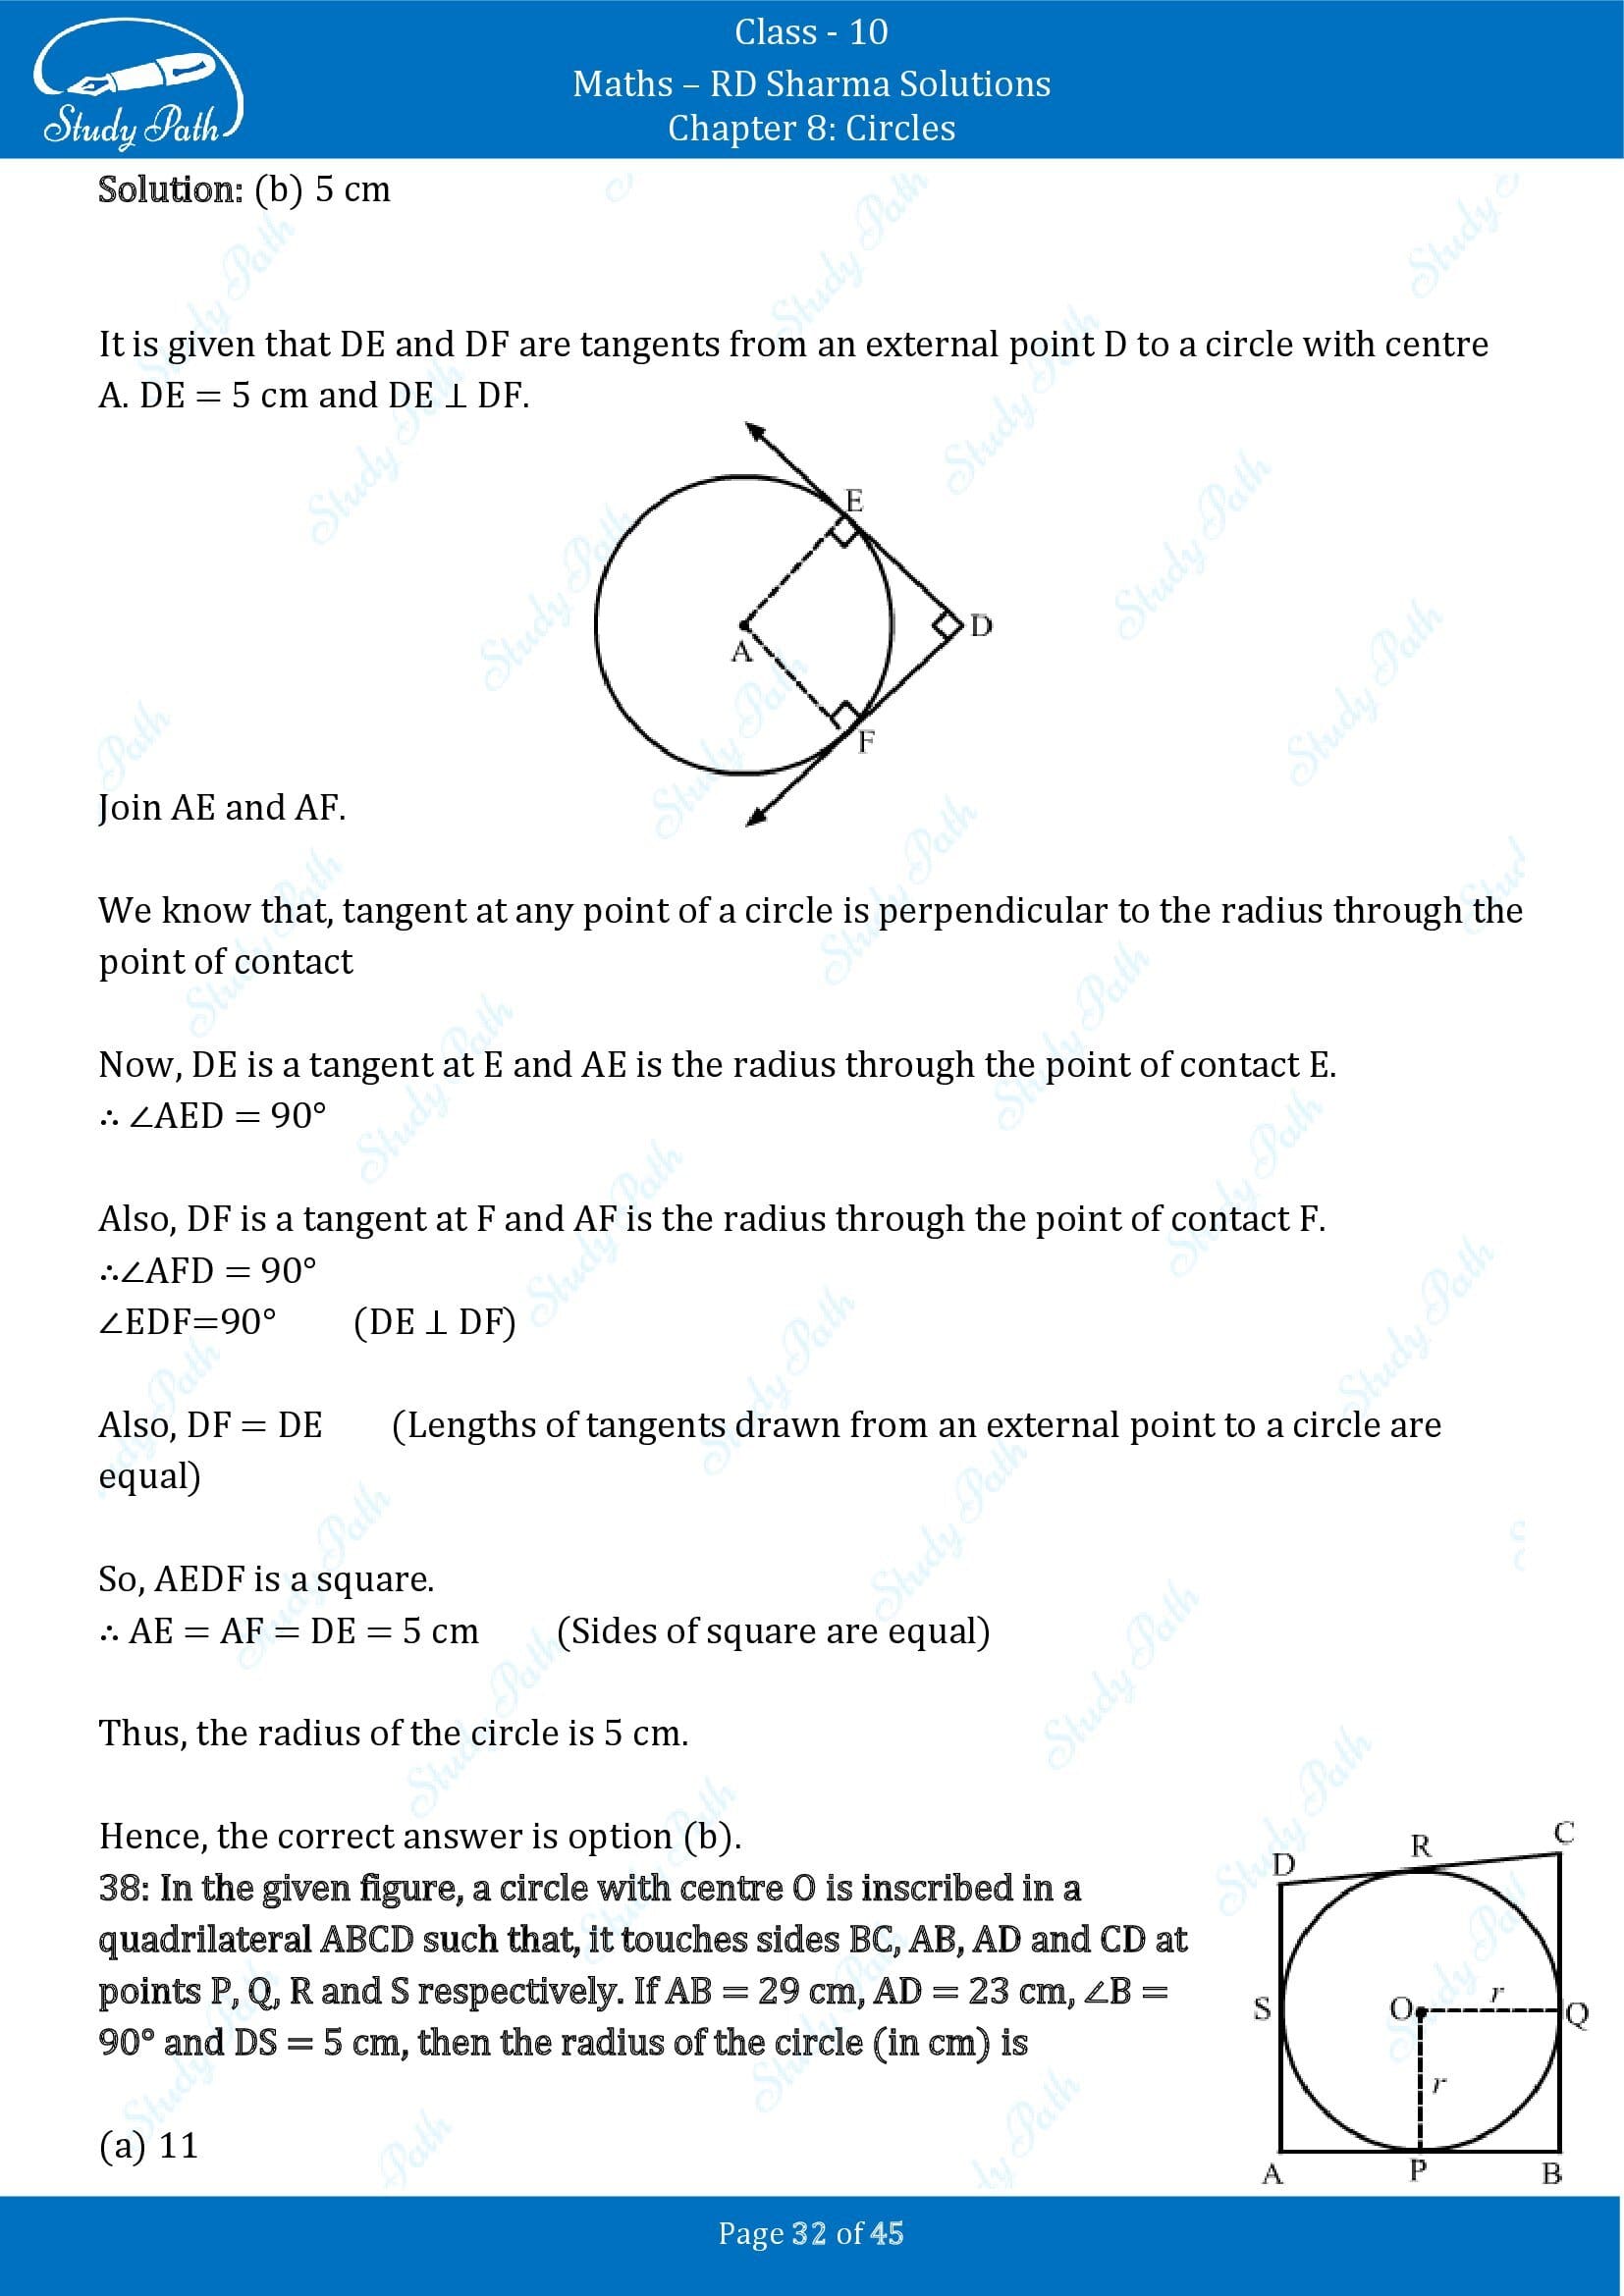 RD Sharma Solutions Class 10 Chapter 8 Circles Multiple Choice Questions MCQs 00032